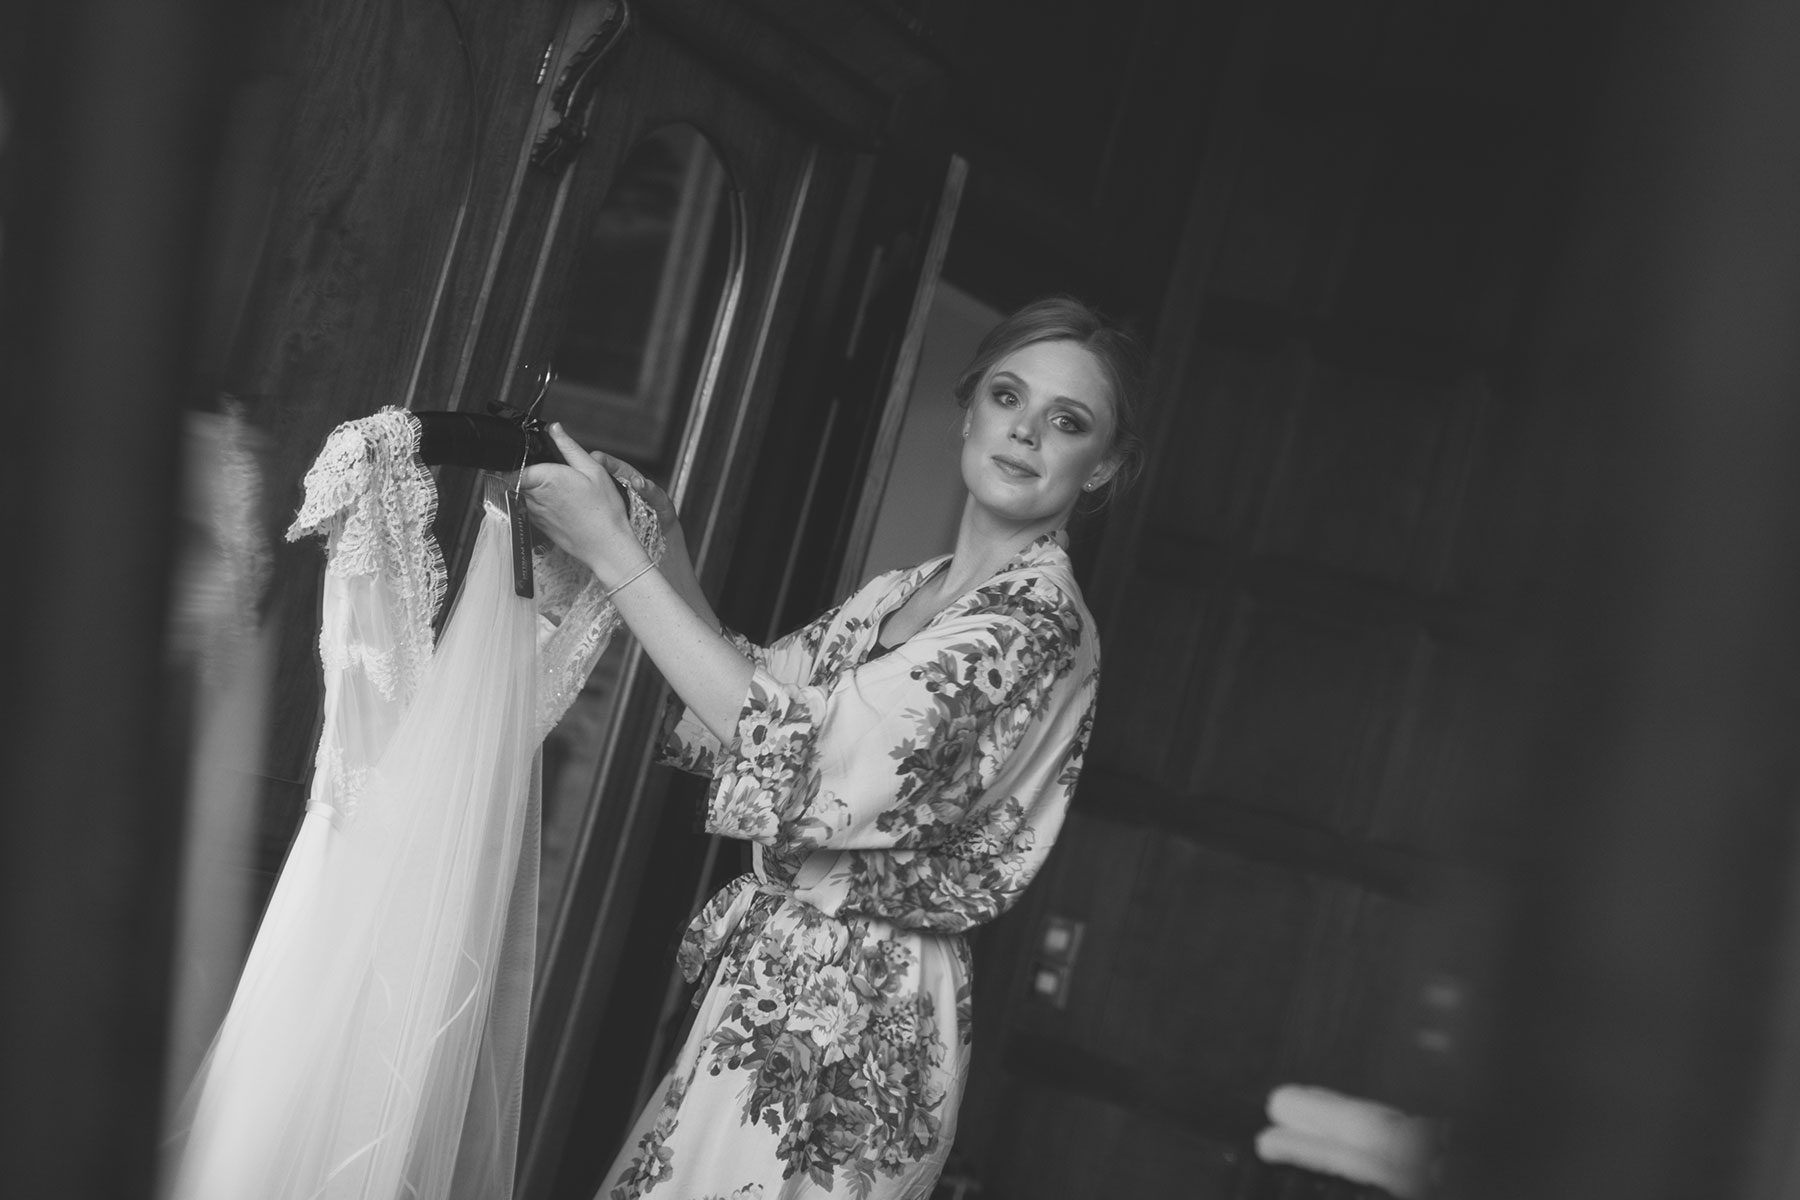 It's time - Reportage Wedding Photography in Cheltenham | Bullit Photography